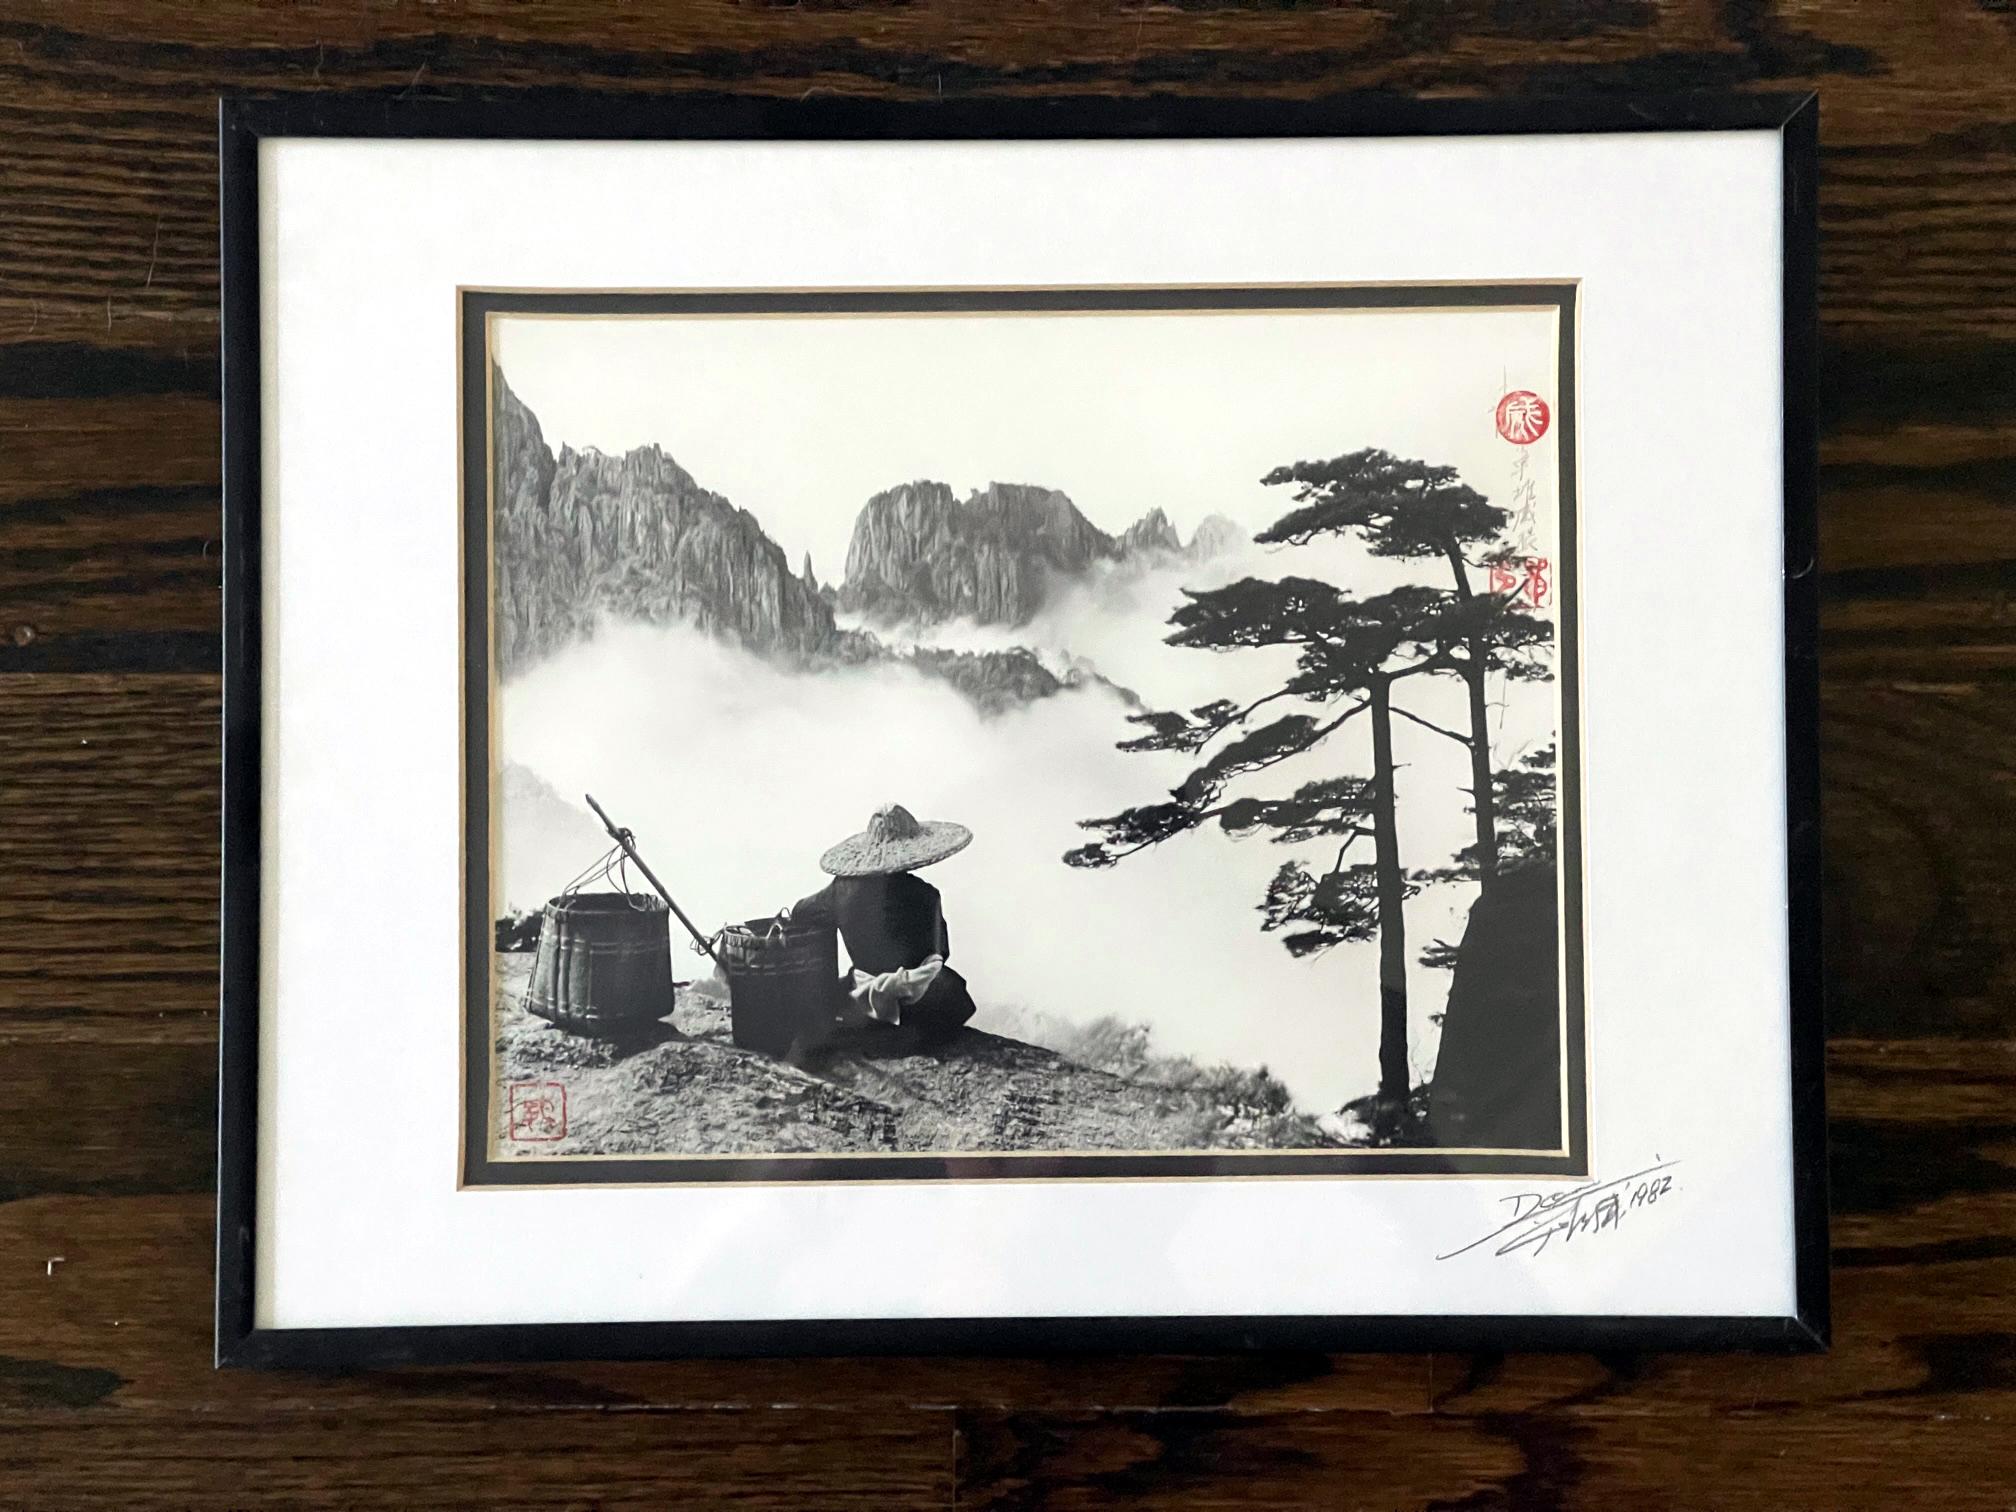 A framed photograph by Chinese American photographer Don Hong-Oai (1929-2004) 